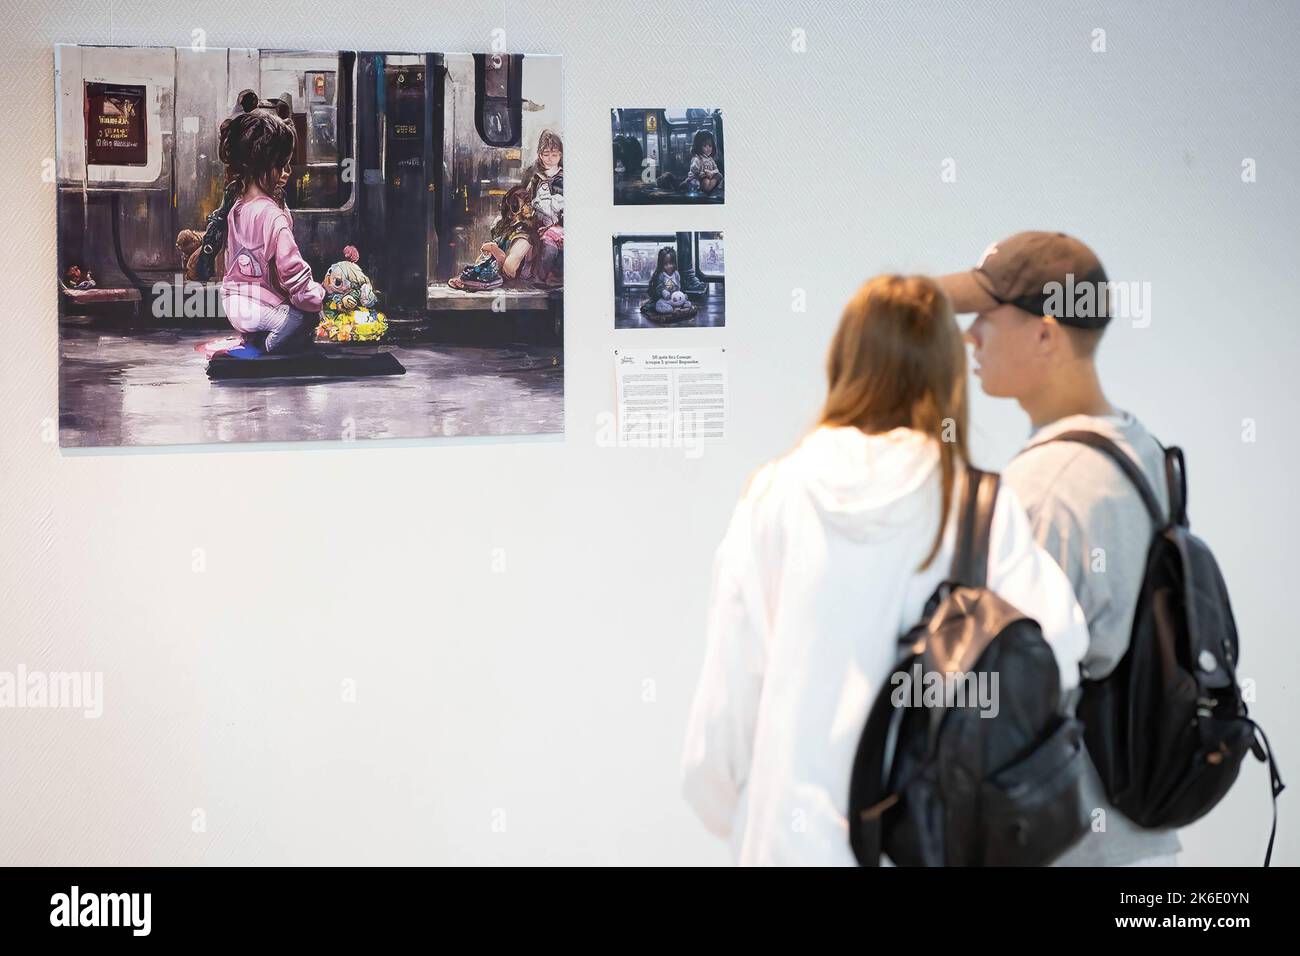 People look at an image generated based on the stories of displaced children during the evacuation from hot spots in the south-east of Ukraine in Kyiv. The exhibition of these pictures is called 'Save Ukr(AI)ne'. On February 2022 Russian troops invaded Ukrainian territory starting a conflict that has provoked destruction and a humanitarian crisis. Stock Photo